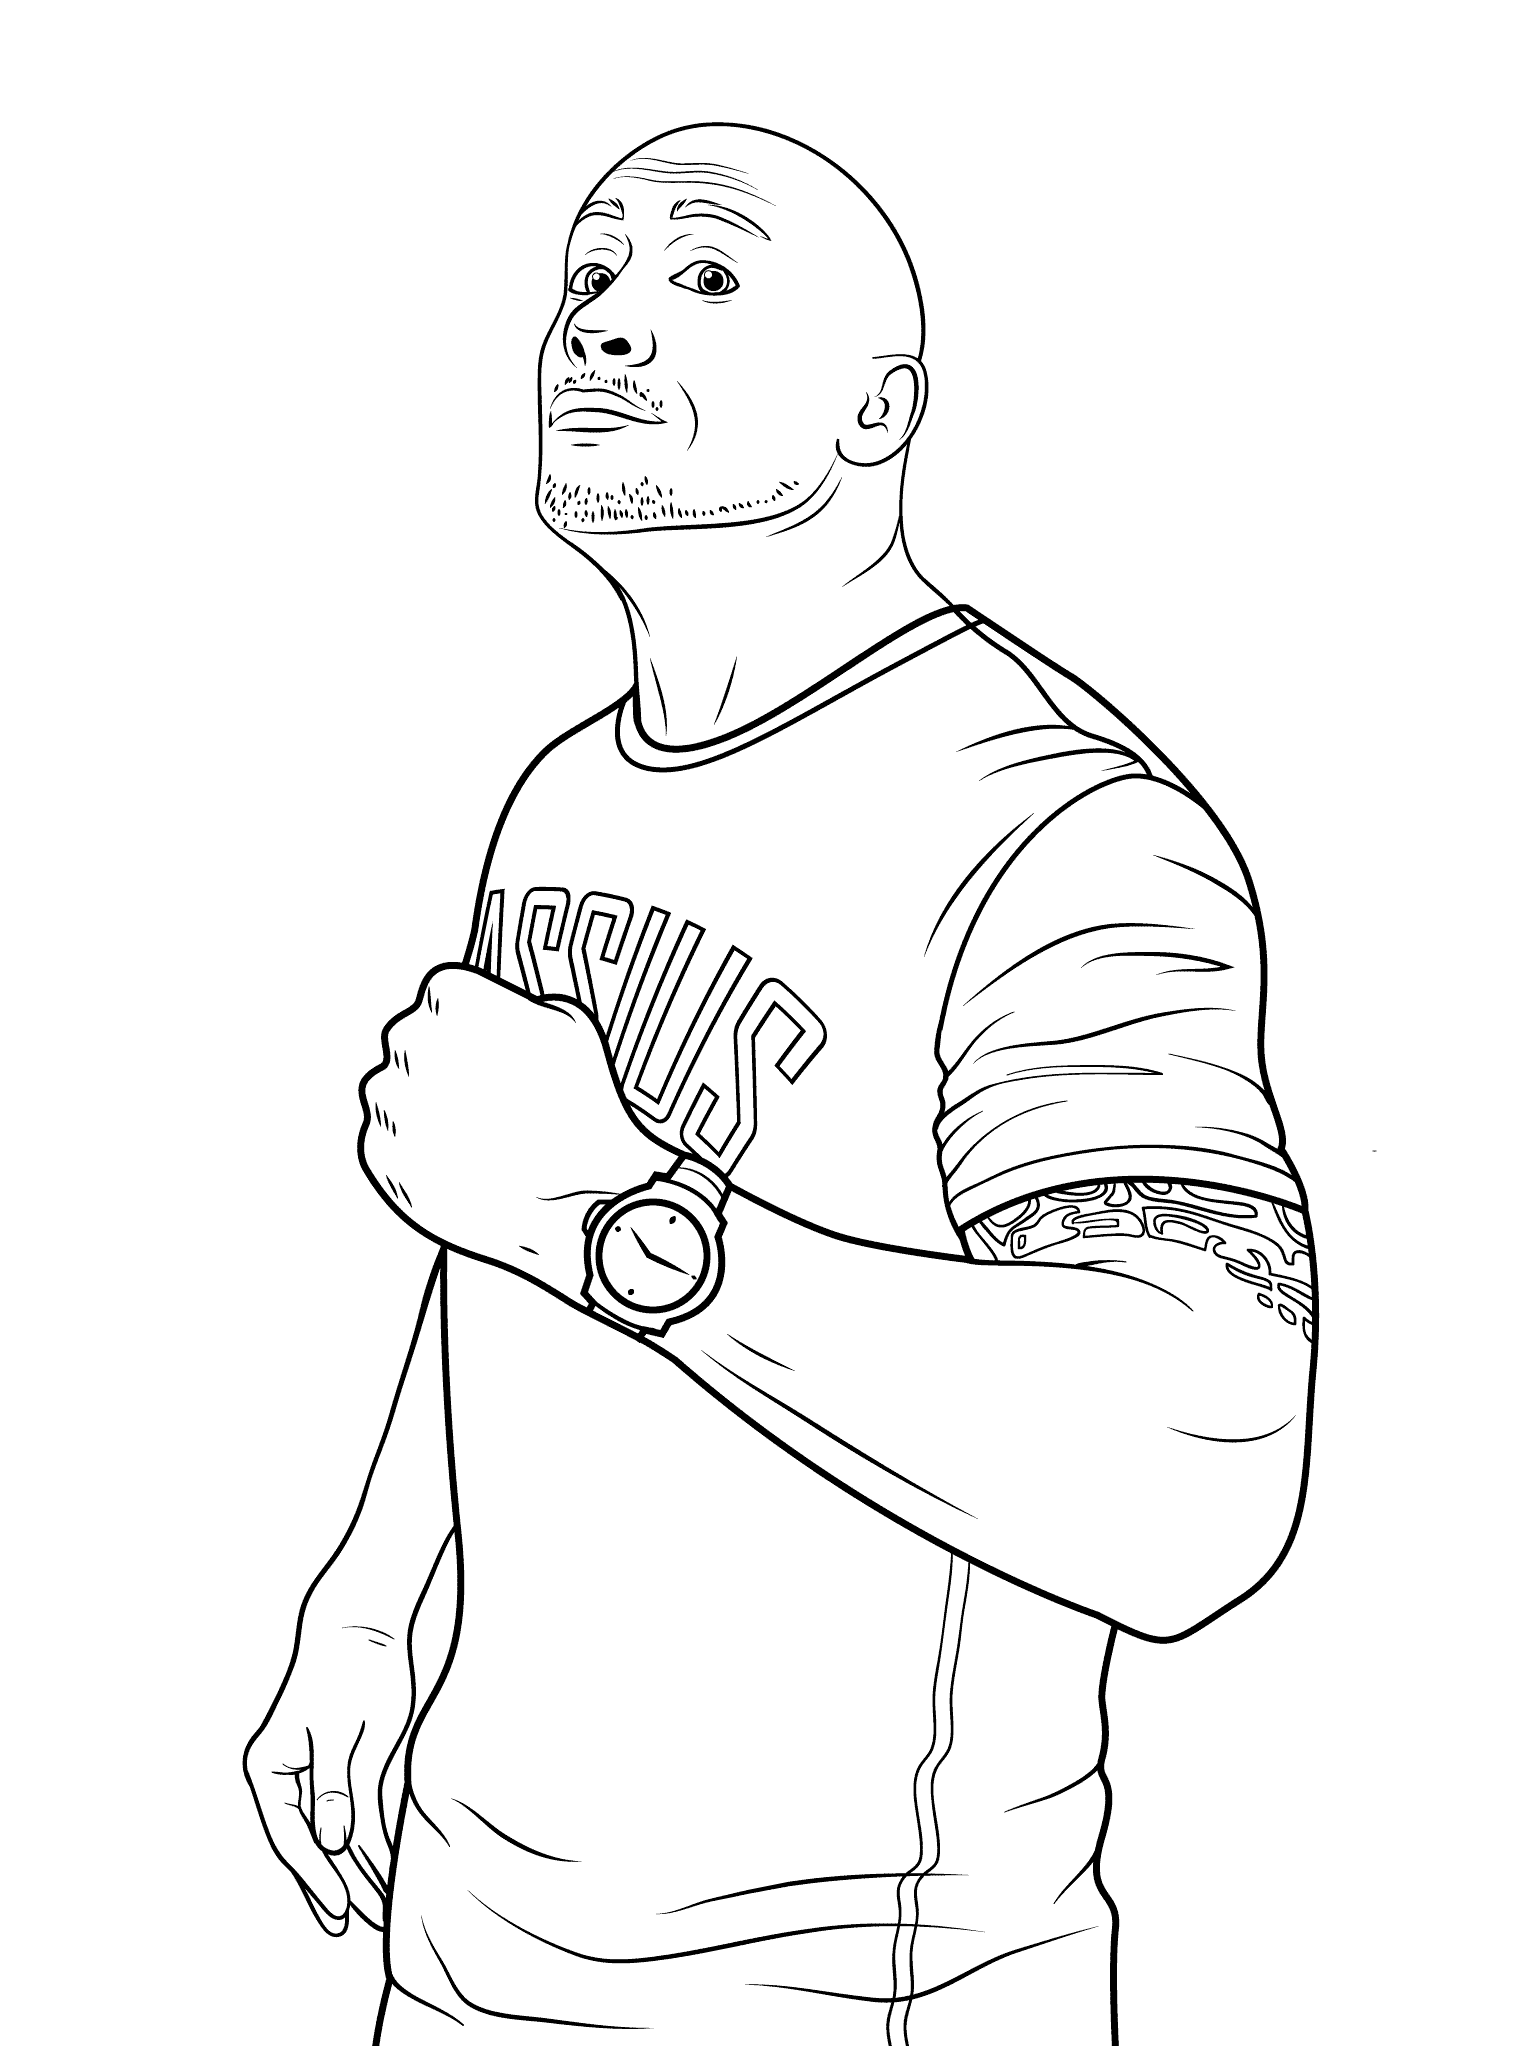 Wwe Dwayne The Rock Johnson Coloring Page Coloring Page